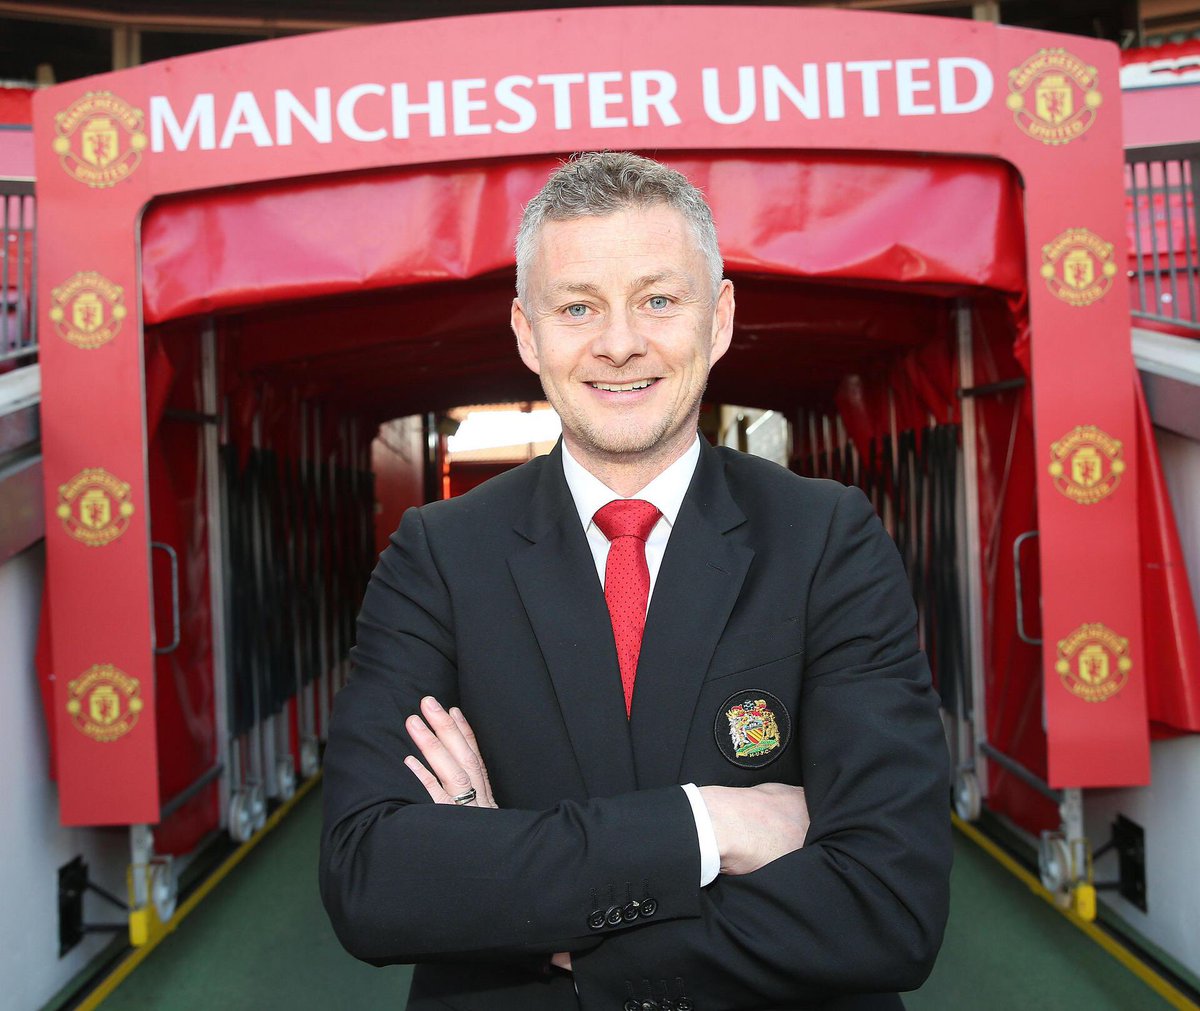 Now we move onto the Ole Gunnar Solskjaer era. 2018 - ongoing.